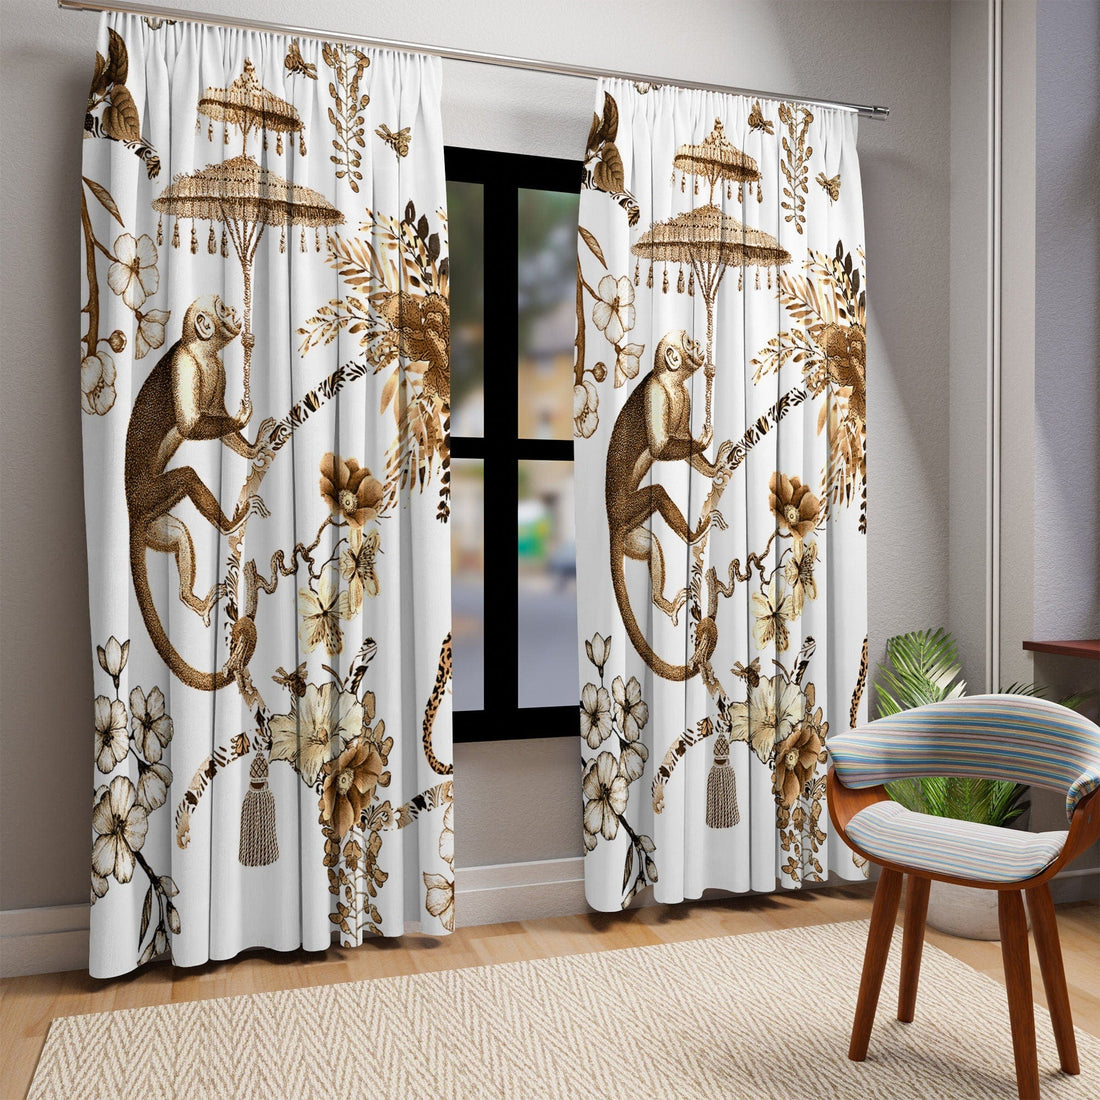 Kate McEnroe New York Chinoiserie Jungle Botanical Toile Window Curtains, Brown, White Chinoiserie Floral Curtain Panels, Country Farmhouse Decor - 122681123Window CurtainsW3D - MON - OBN - SH5